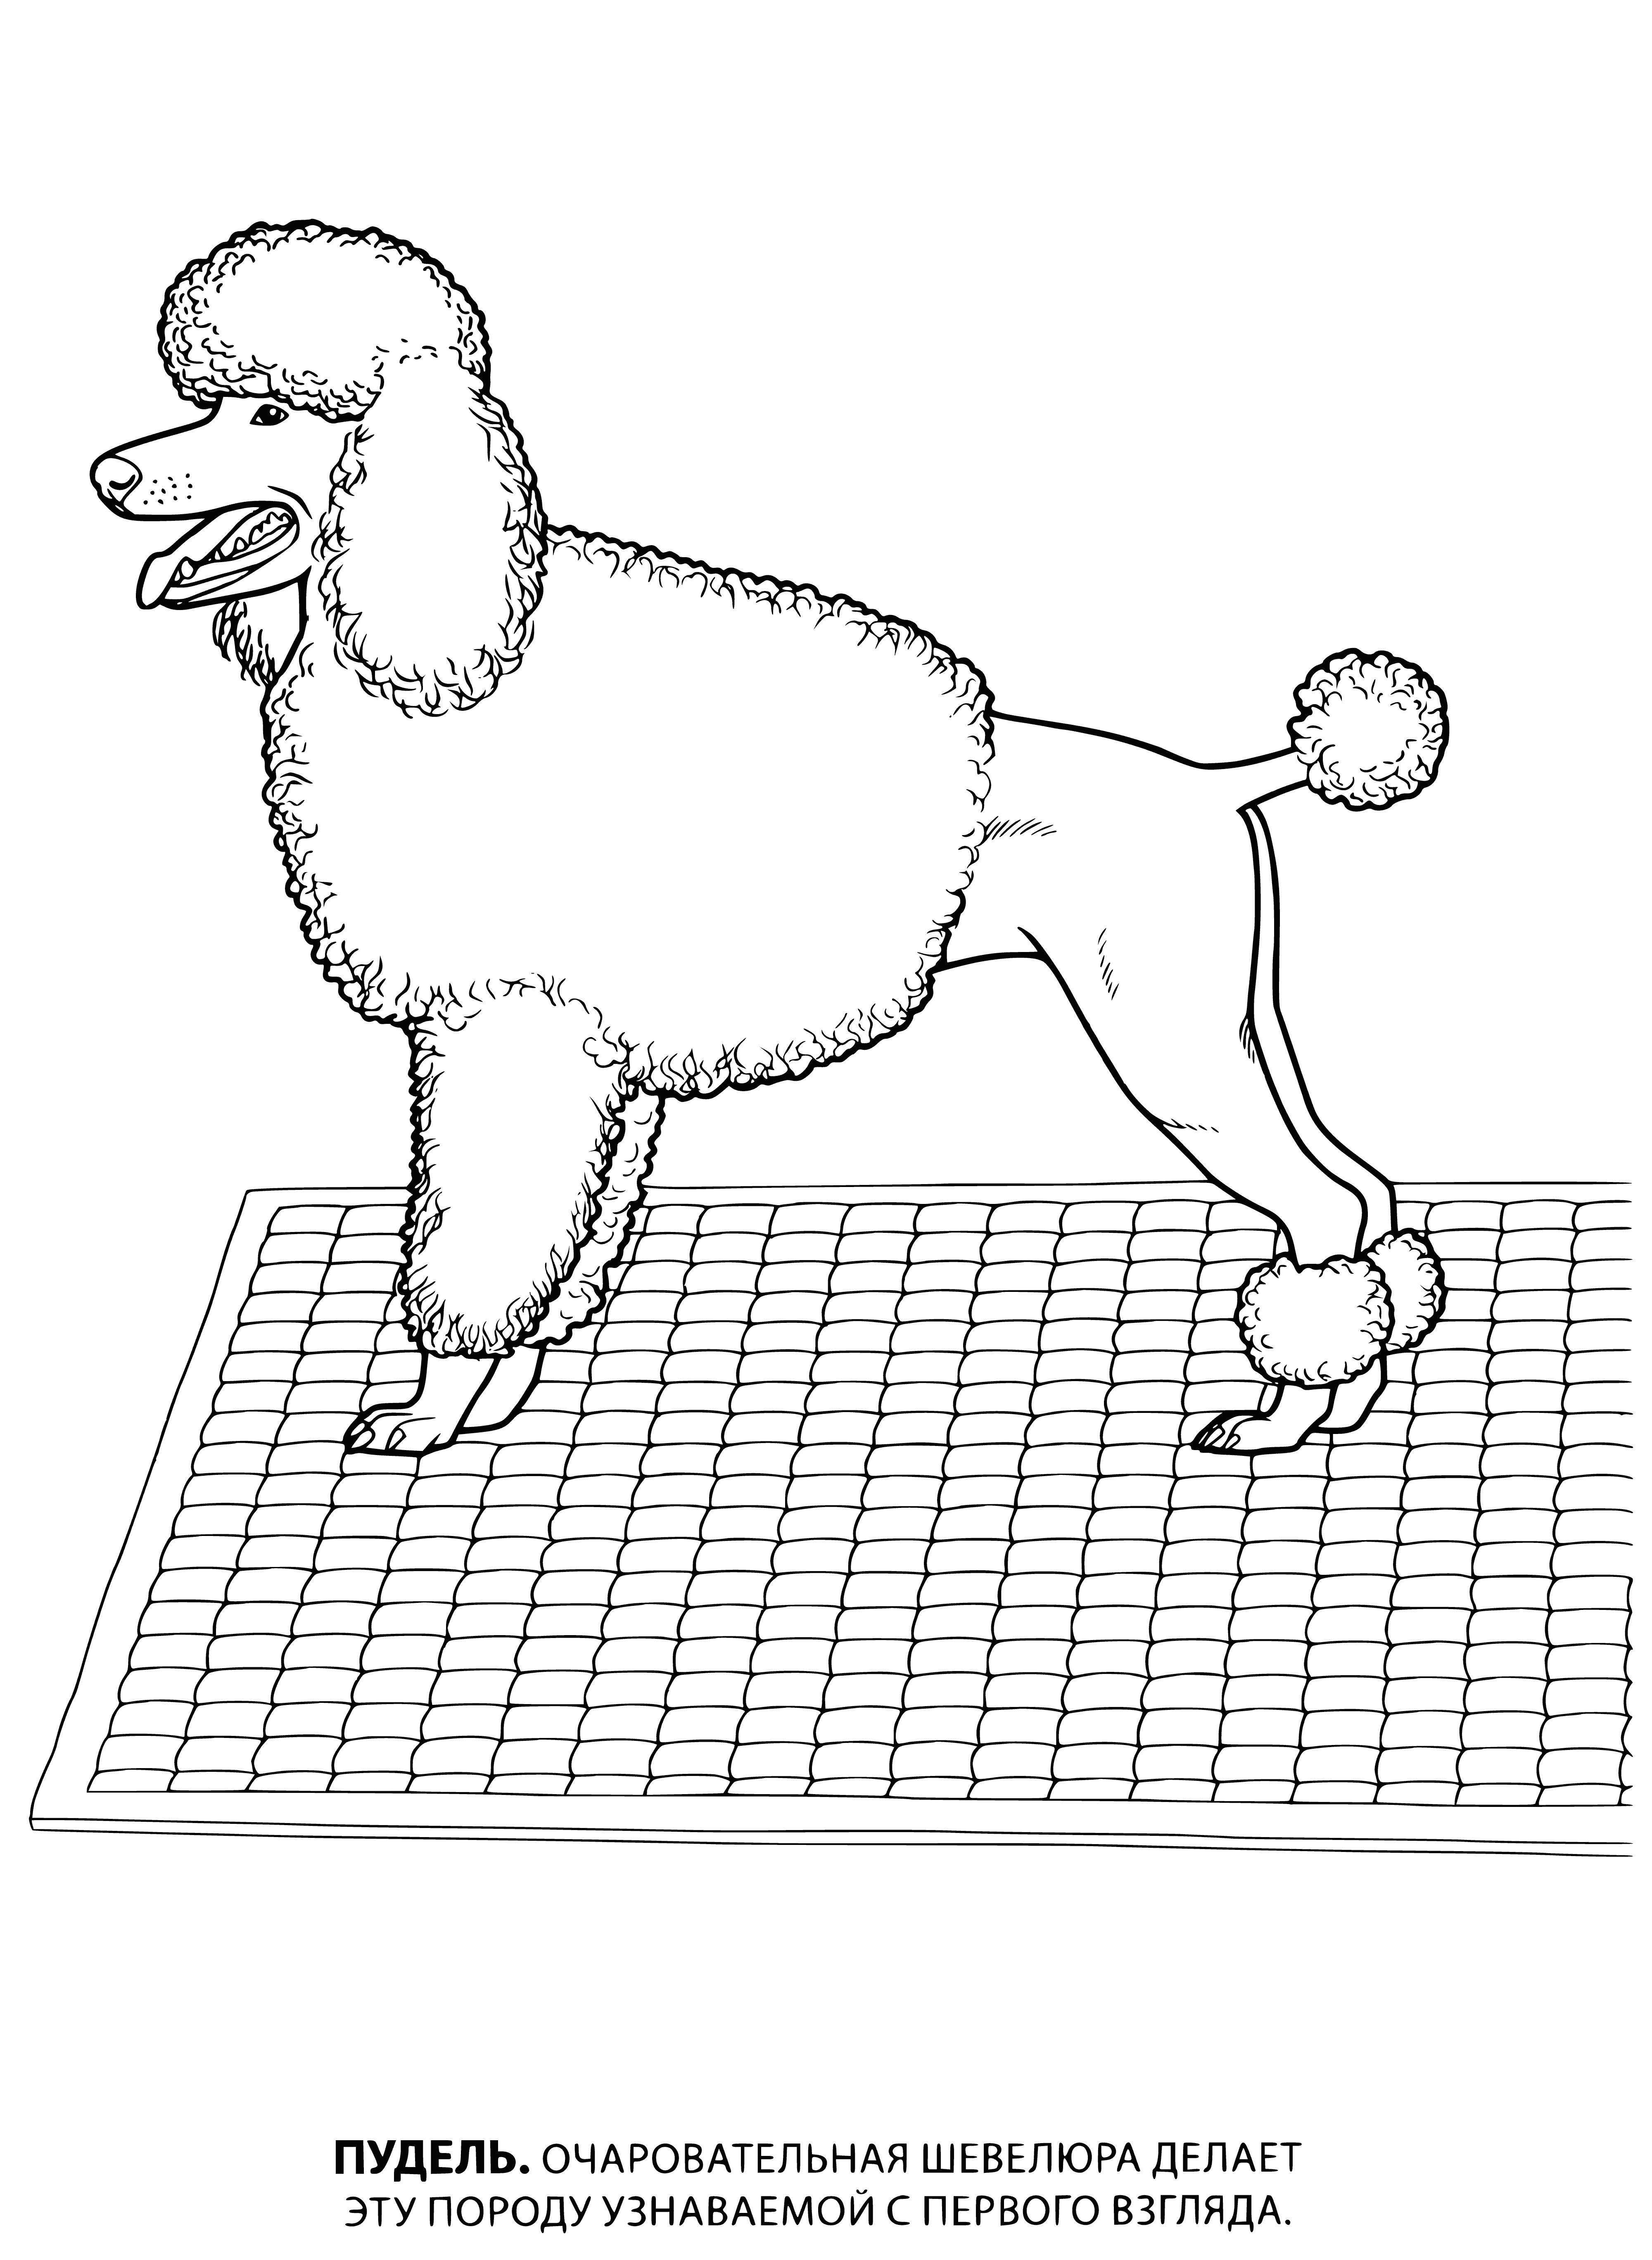 Poodle coloring page